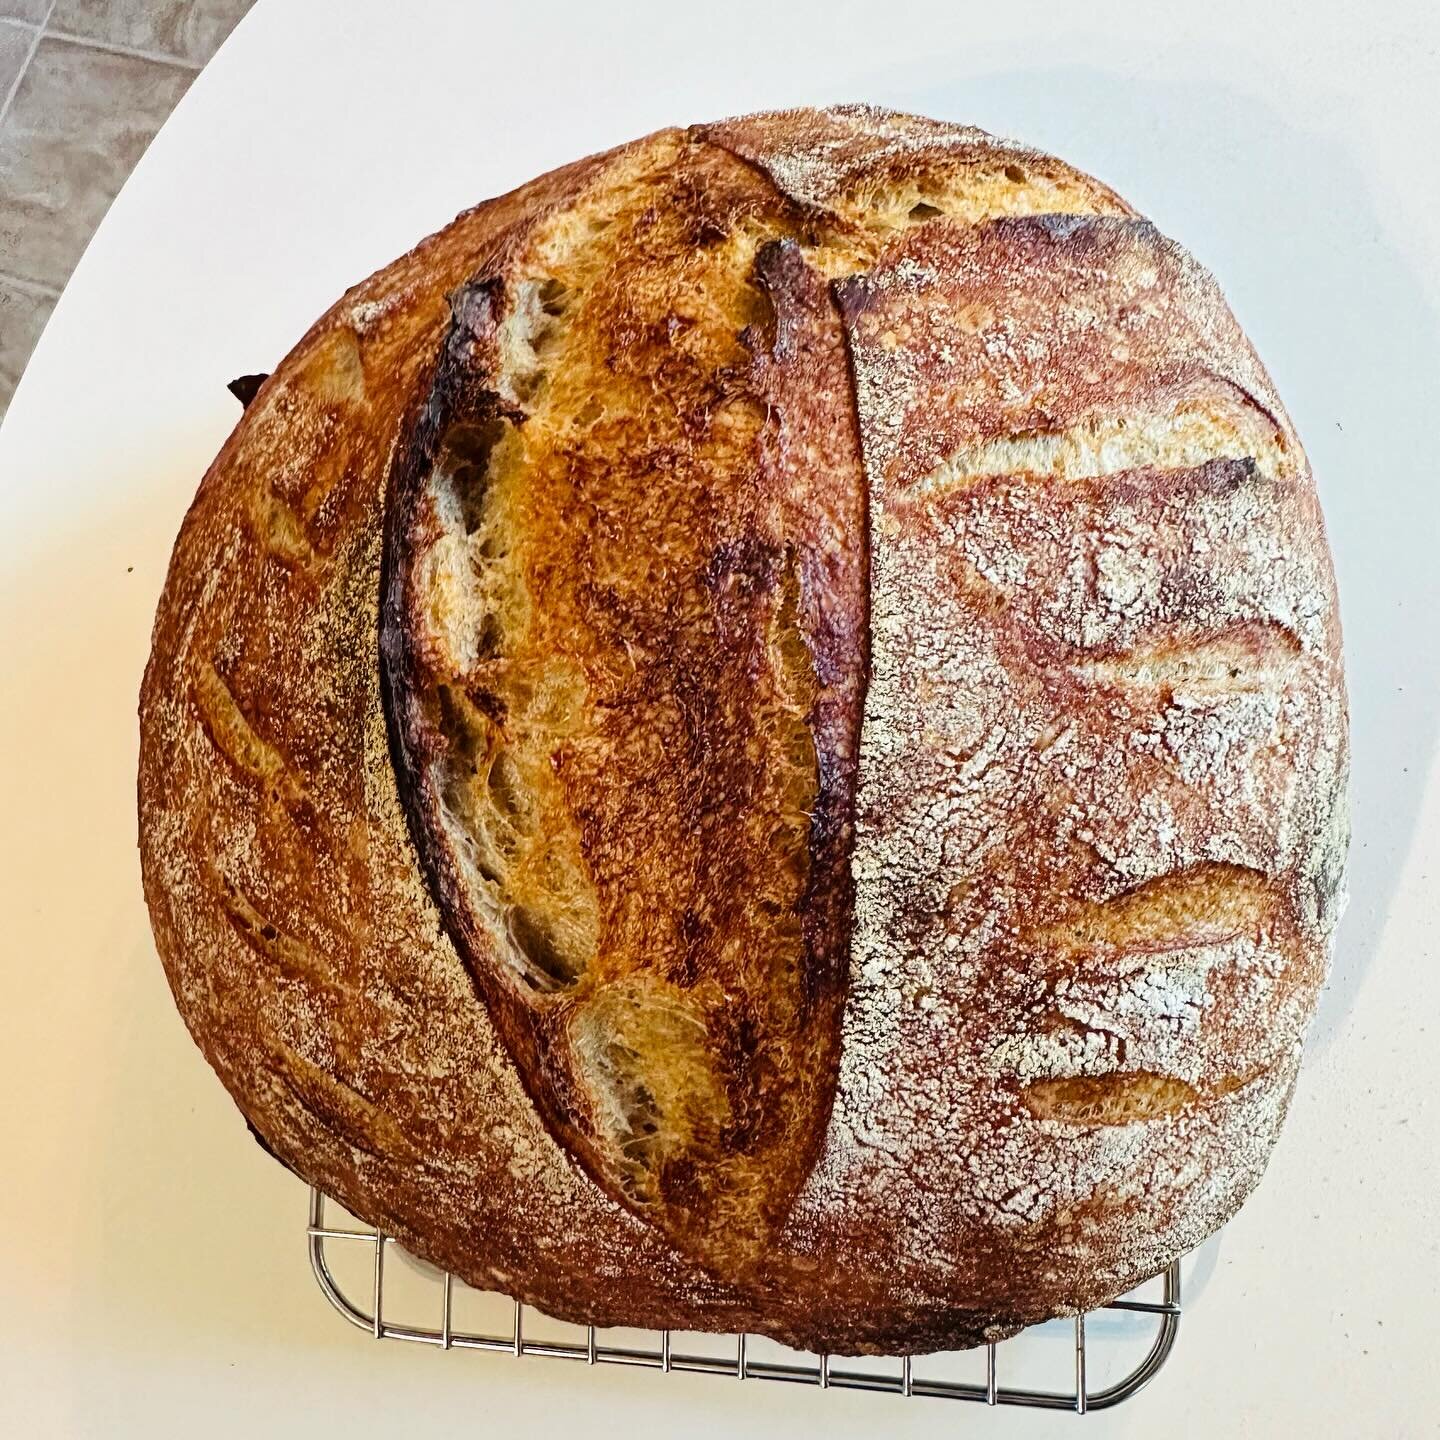 A quick Monday morning Sourdough loaf